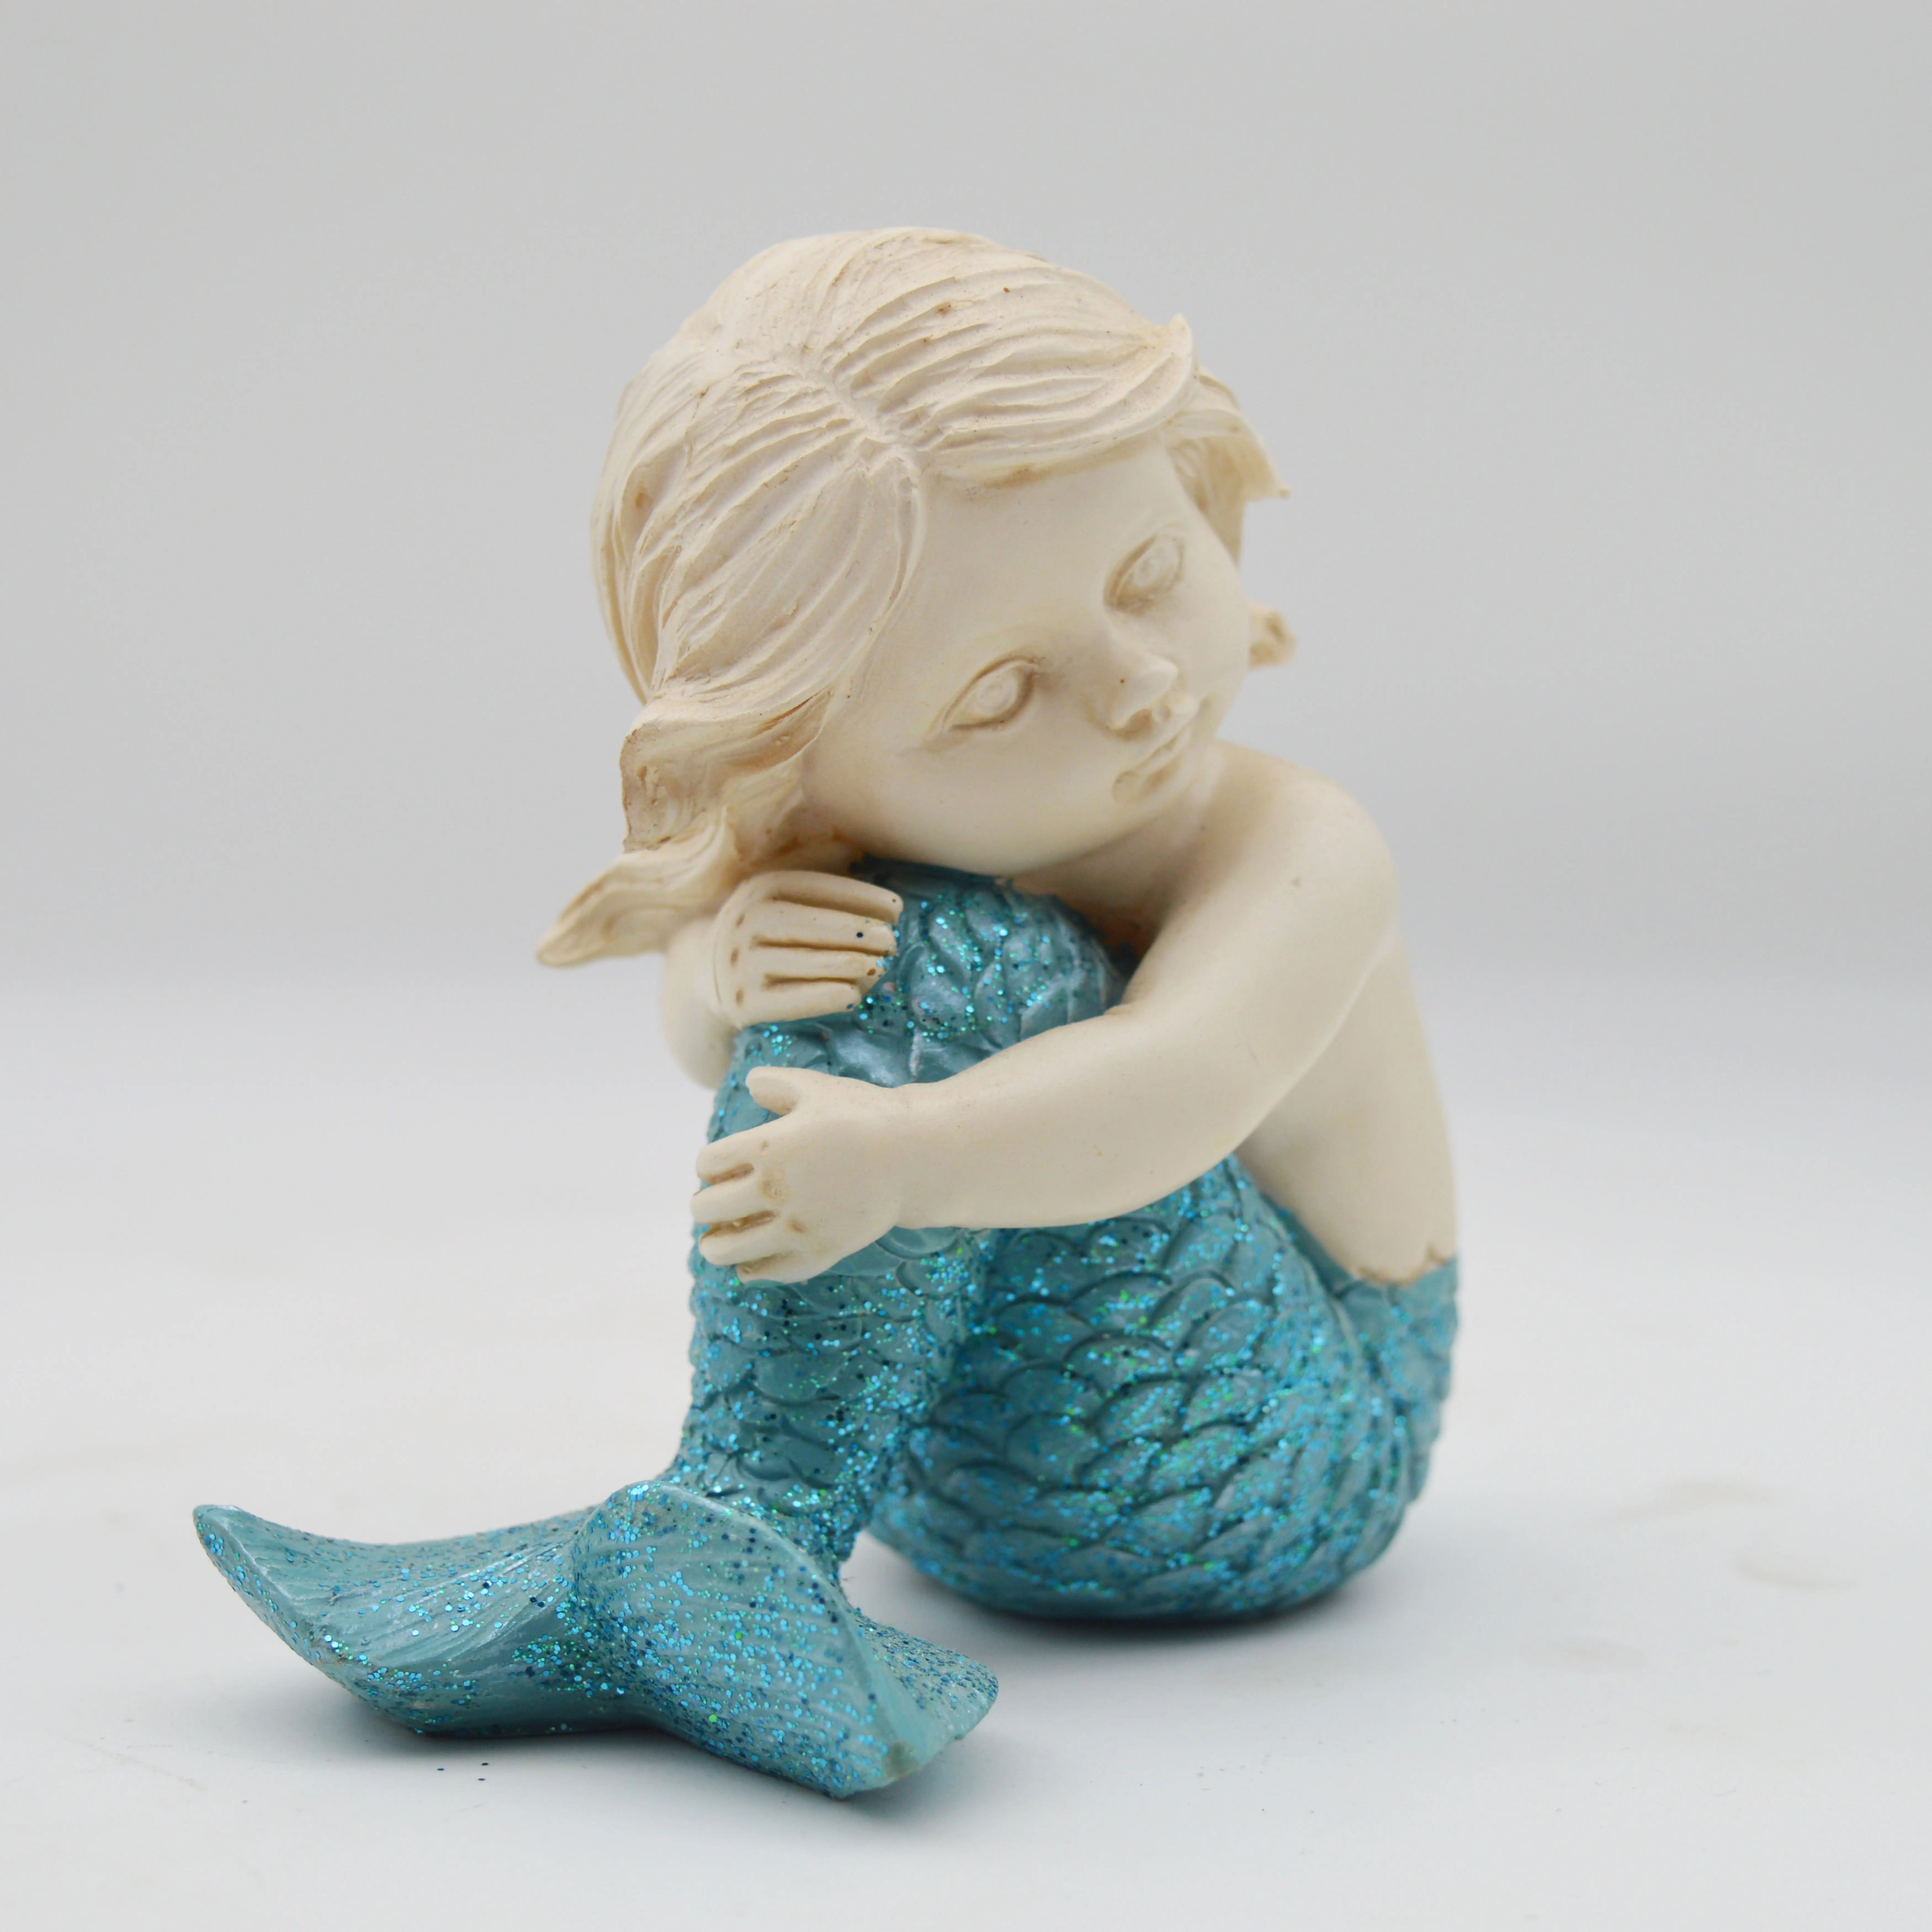 Mermaid resin statue, suitable for indoor and outdoor decoration by everyone